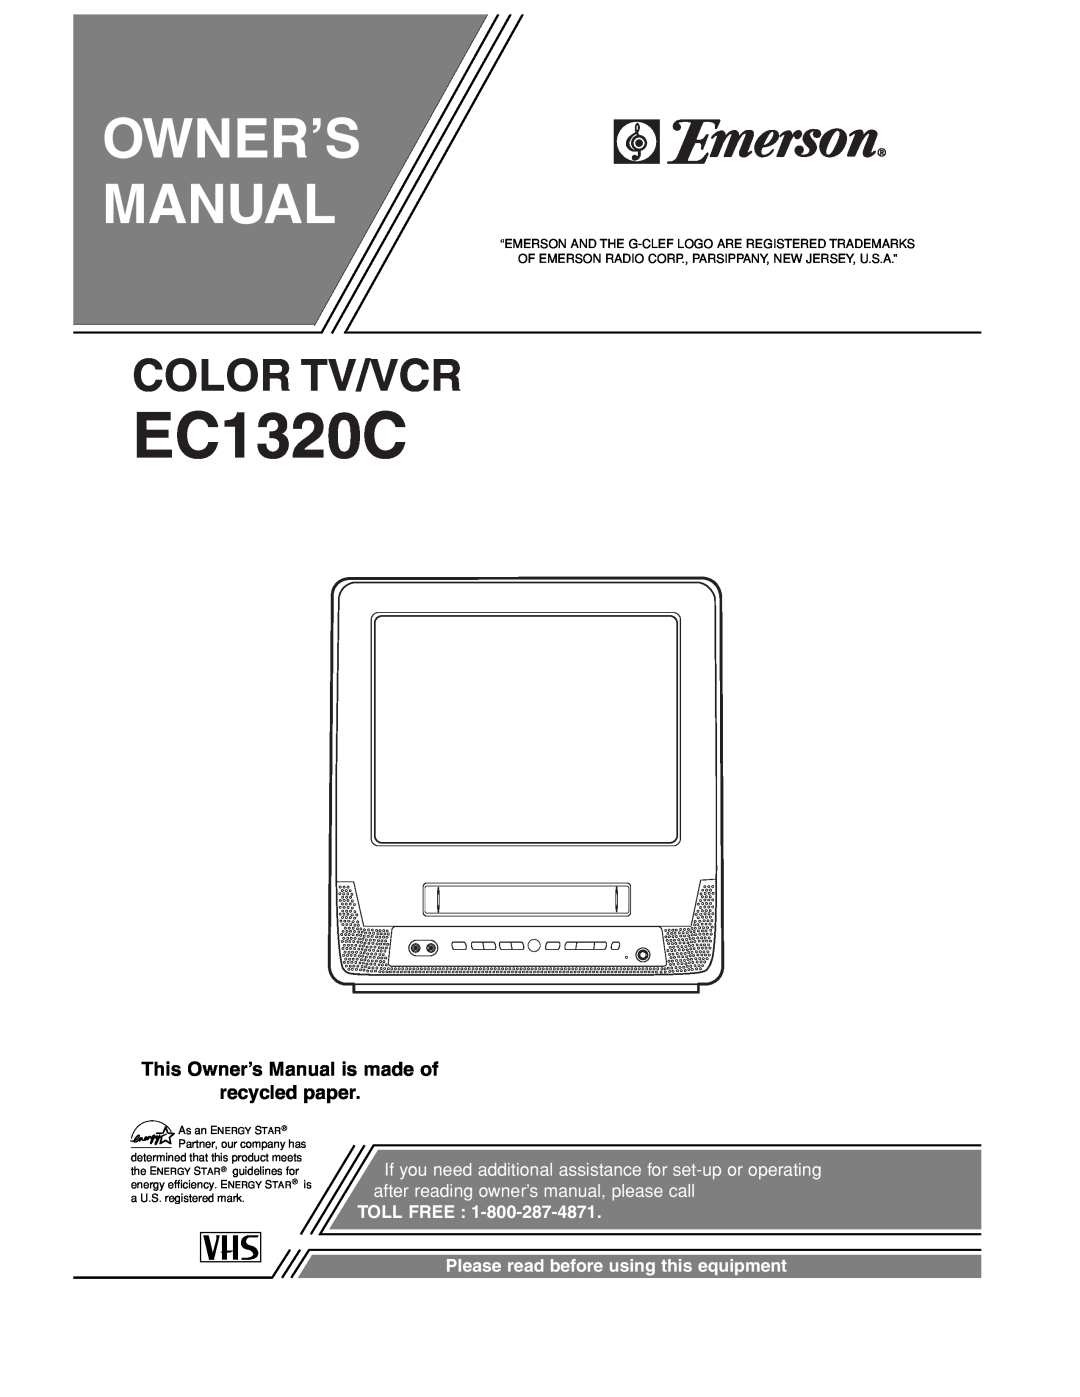 Emerson EC1320C owner manual Owner’S Manual, Color Tv/Vcr, This Owner’s Manual is made of recycled paper, Toll Free 